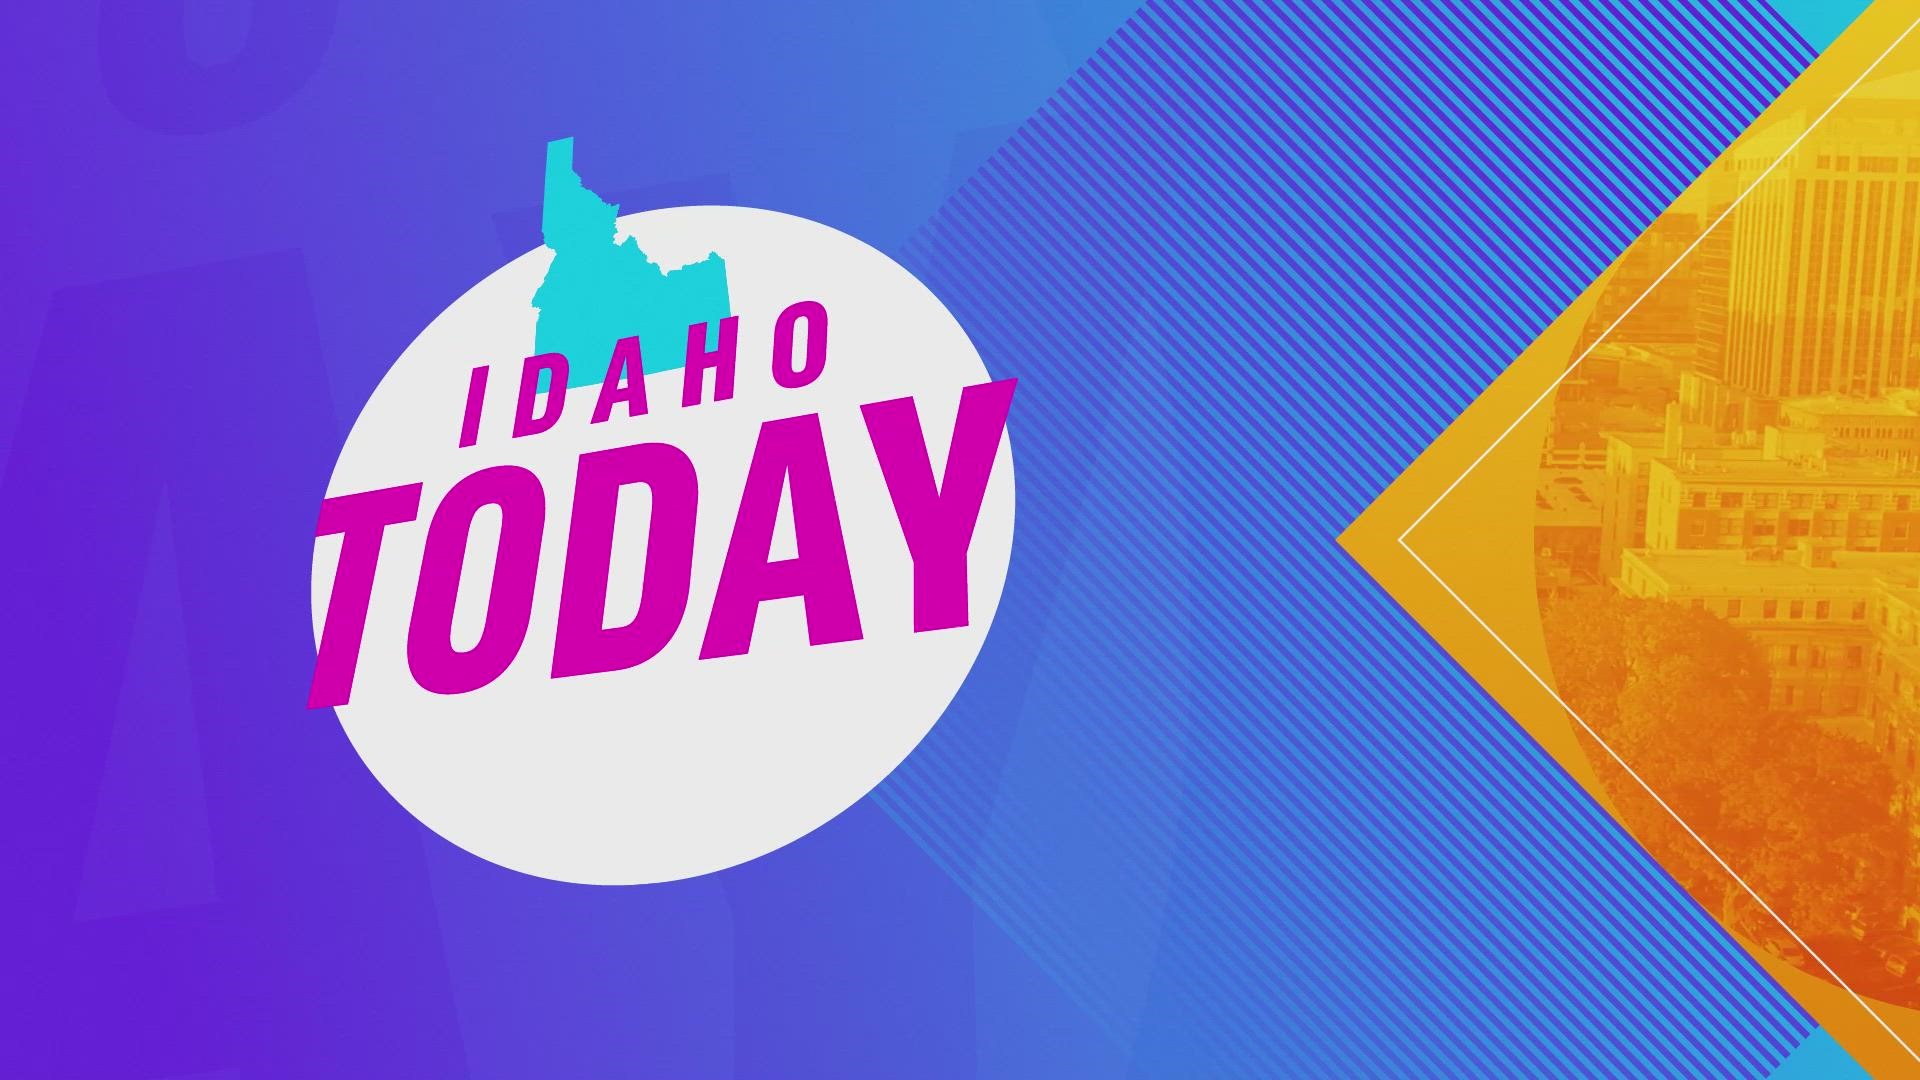 Hosted by Emmy Award winning journalist and Idaho native Mellisa Paul, Idaho Today is a lifestyle program on KTVB